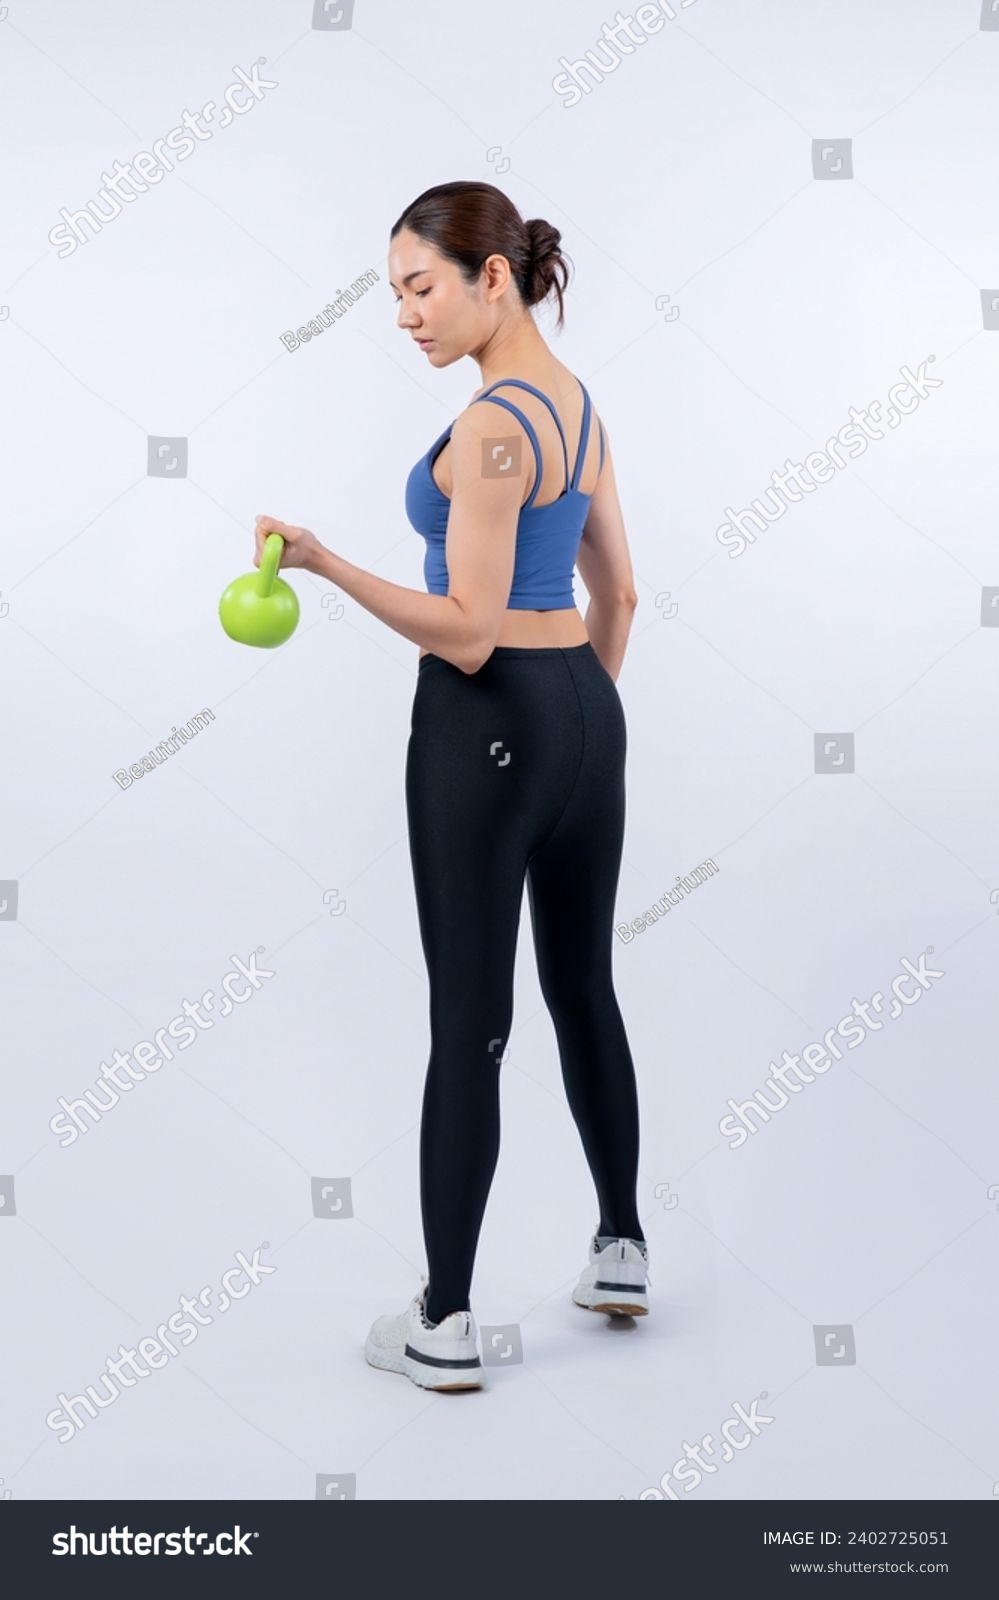 Vigorous energetic woman doing kettlebell weight lifting exercise on isolated background. Young athletic asian woman strength and endurance training session as body workout routine. #2402725051